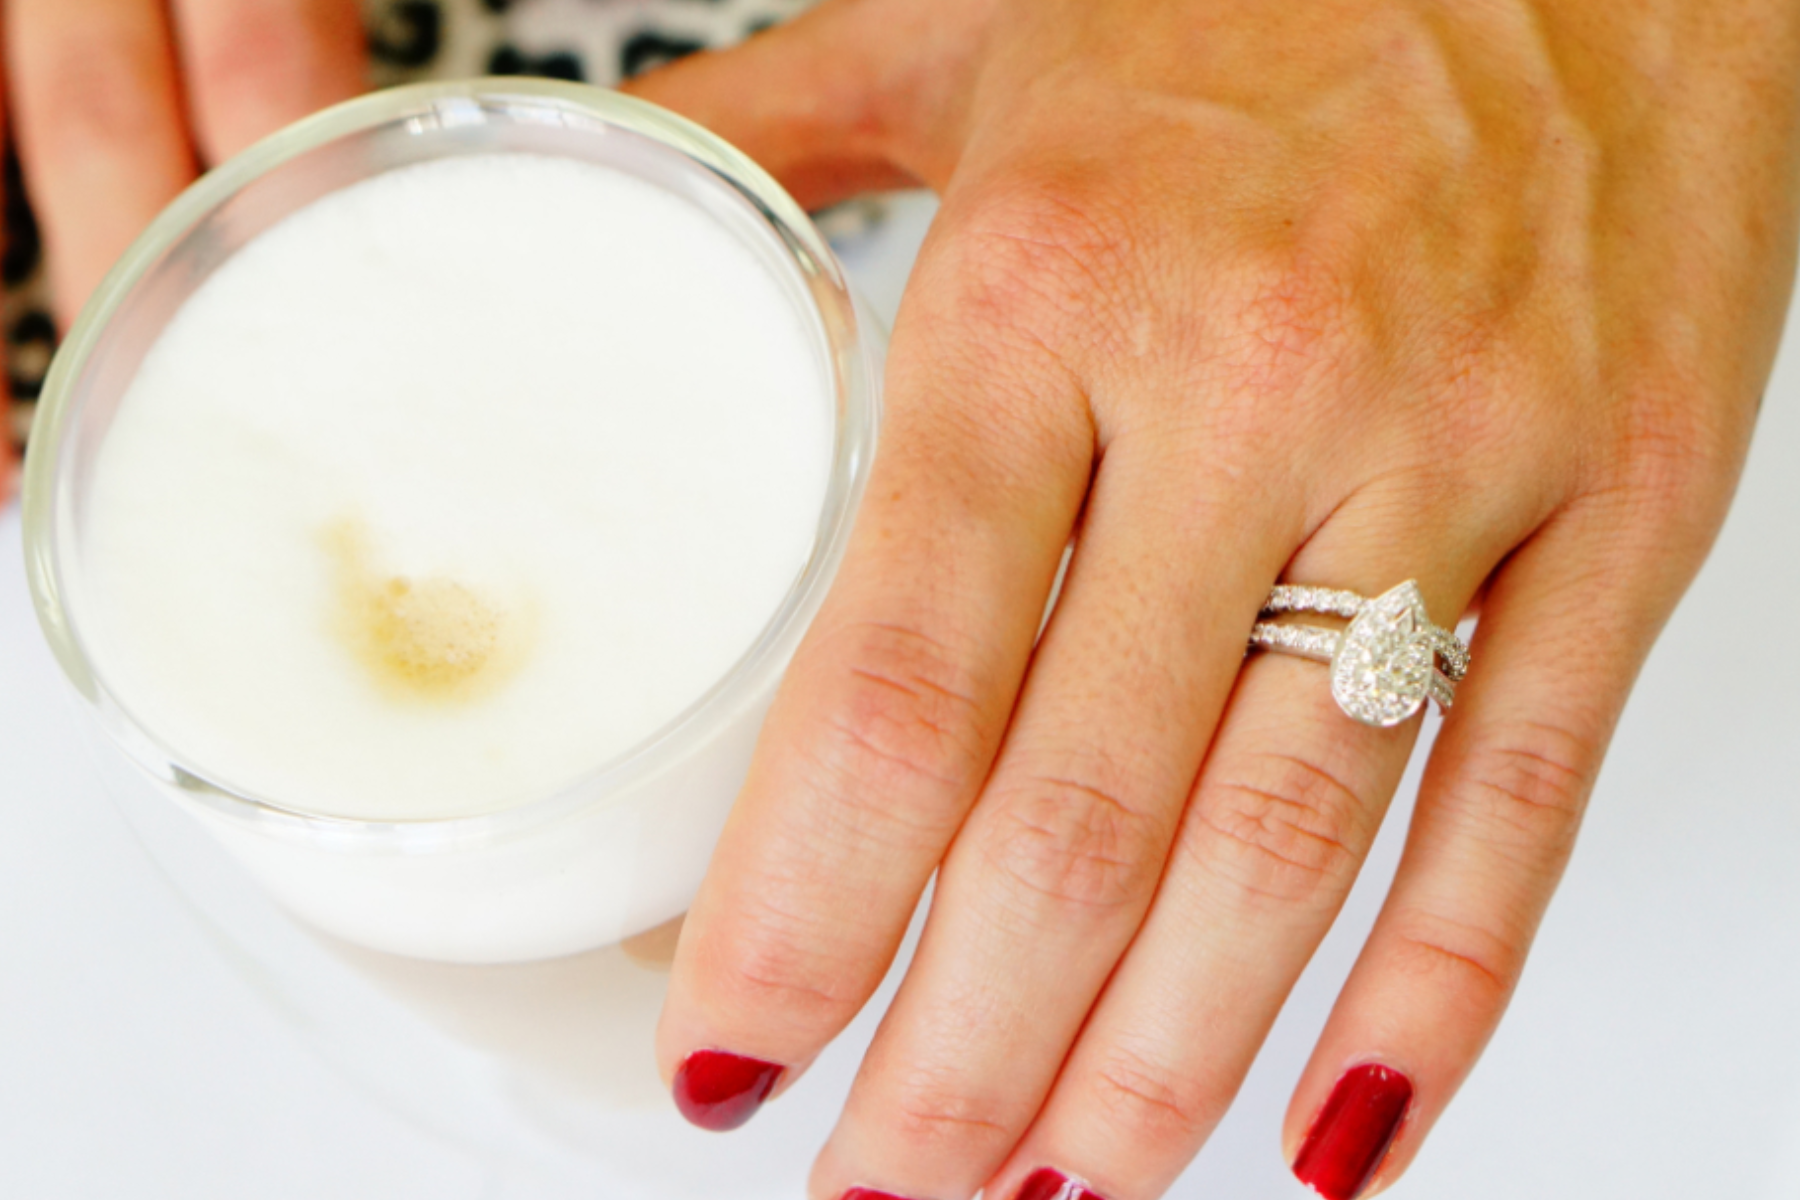 The image depicts a woman's hand with a pear-cut diamond engagement ring being cleaned with a white chemical